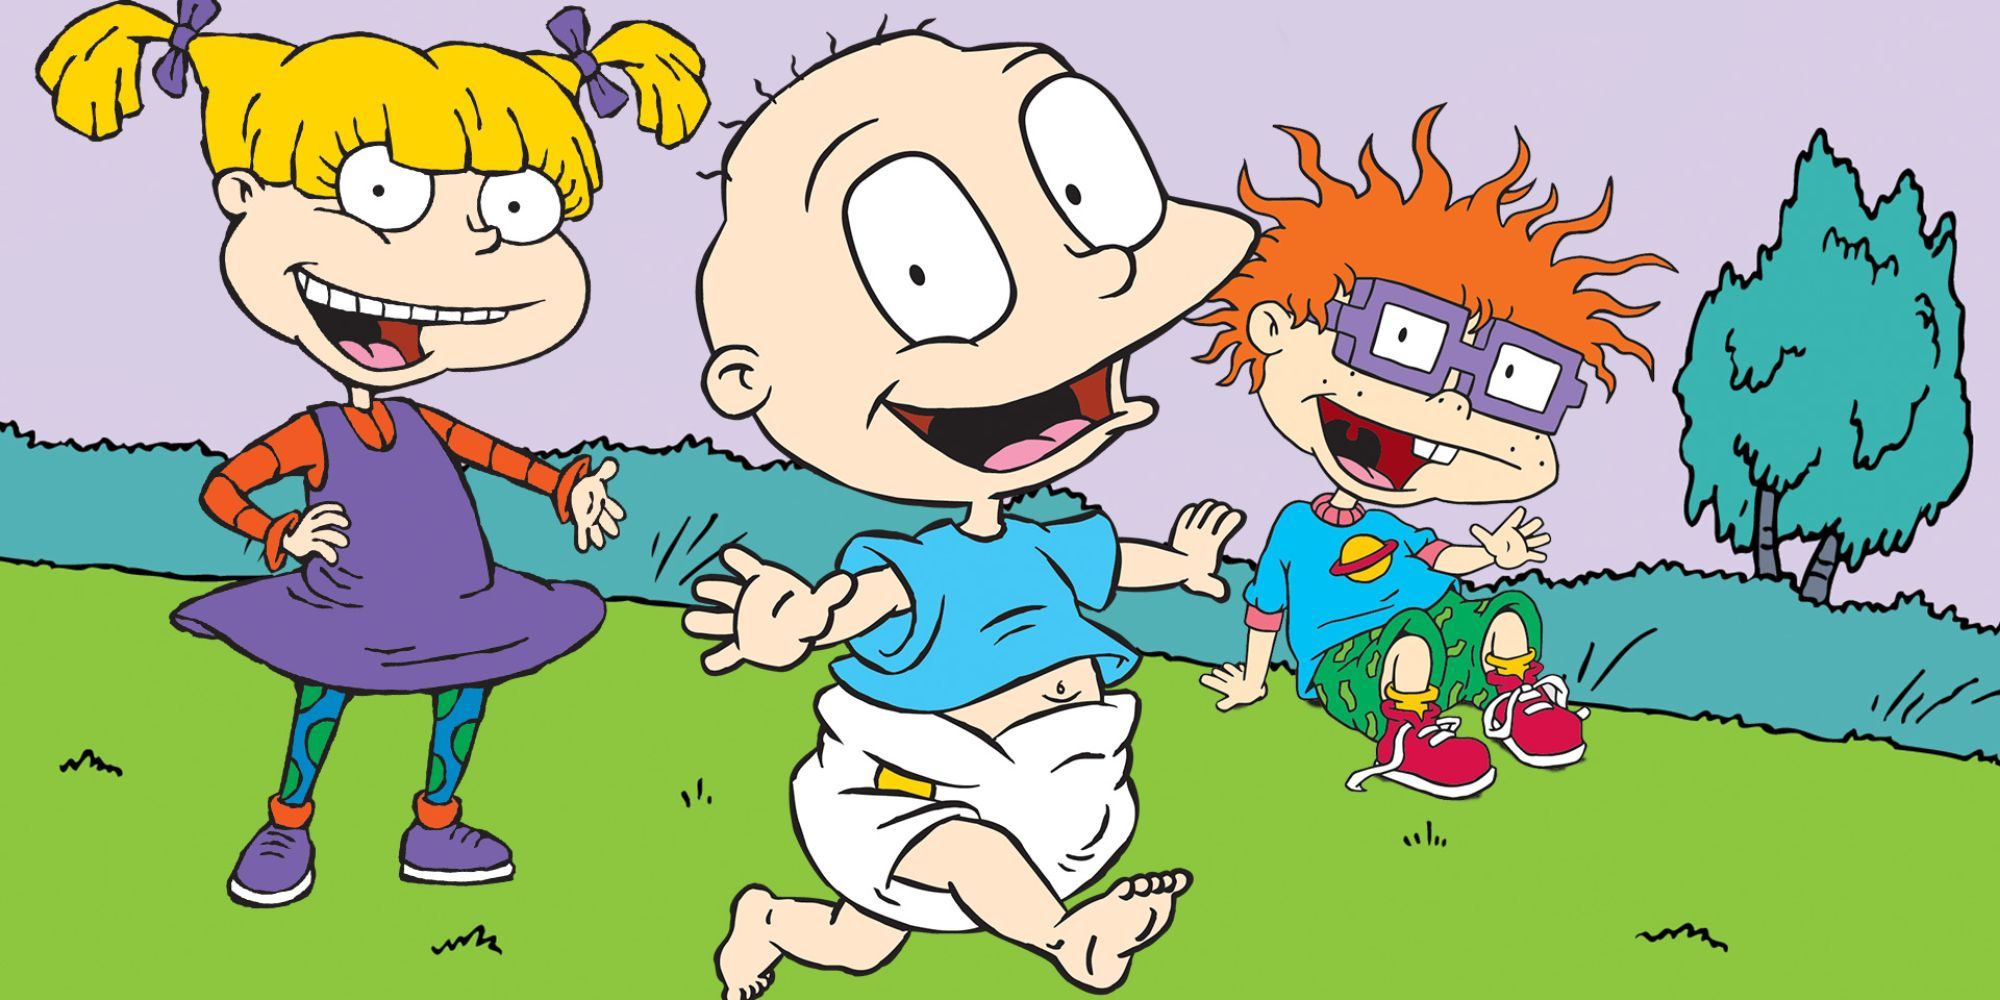 Angelica, Tommy, and Chuckie smiling in Rugrats.